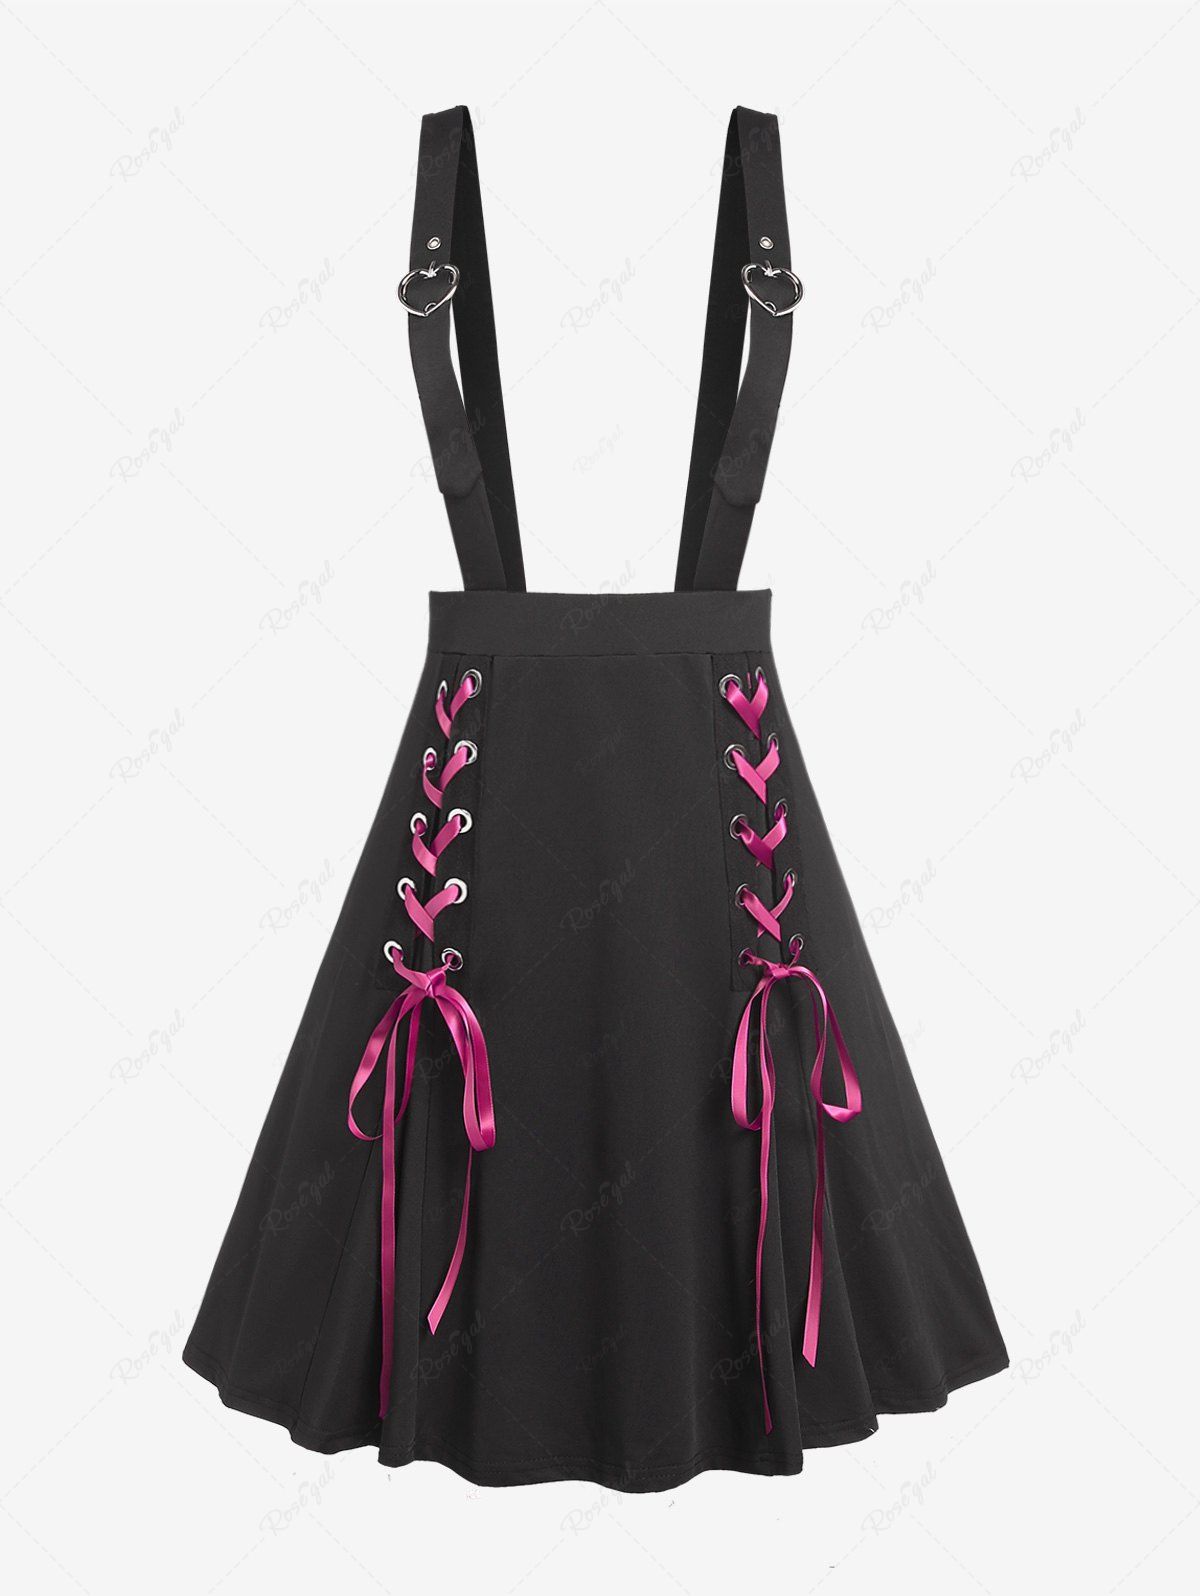 Chic Plus Size Heart Buckles Lace Up Suspender Skirt  